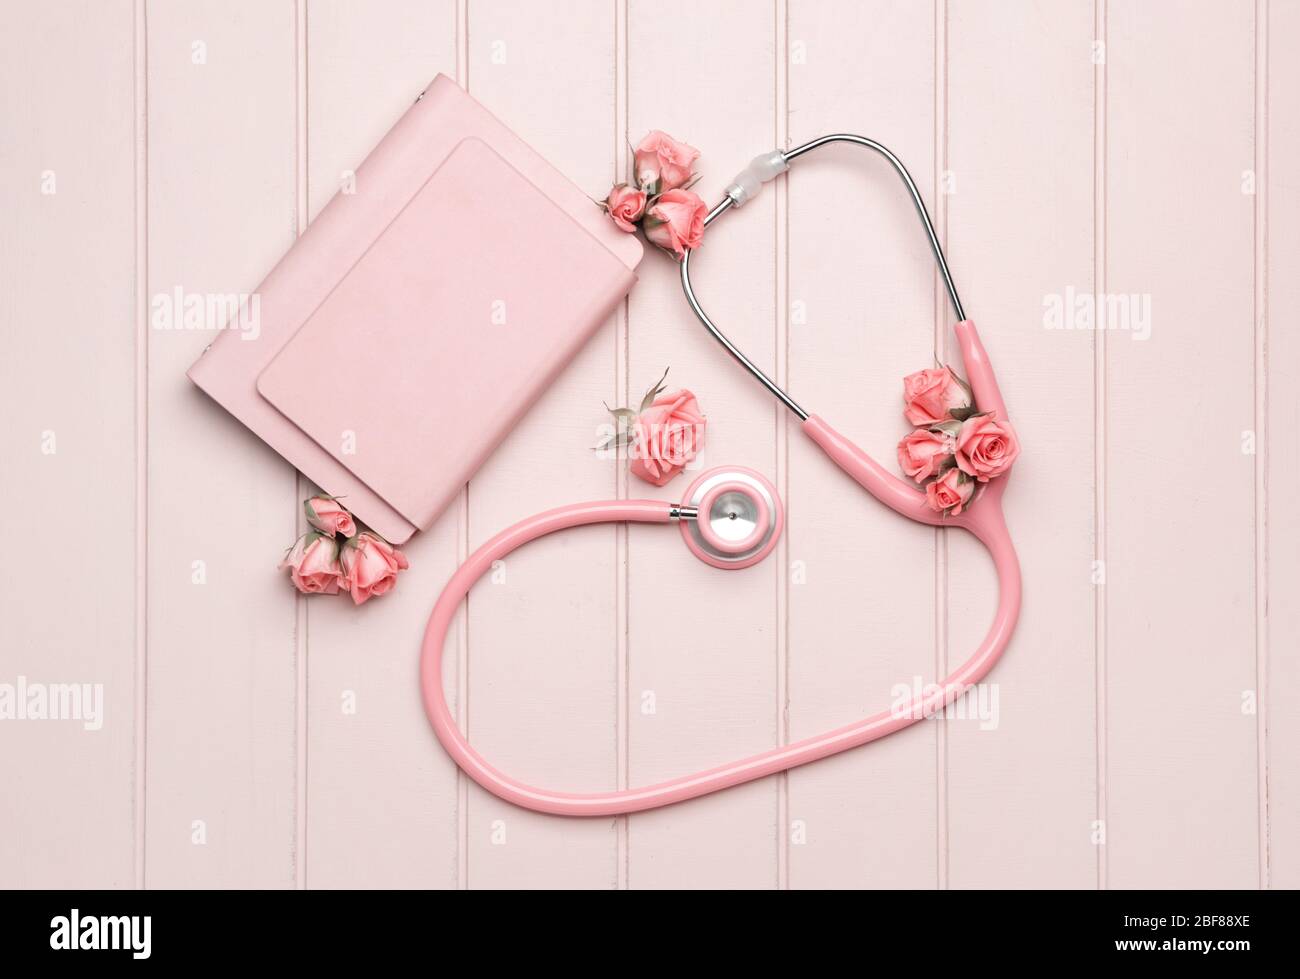 Stethoscope with flowers and notebooks on white wooden background Stock  Photo - Alamy